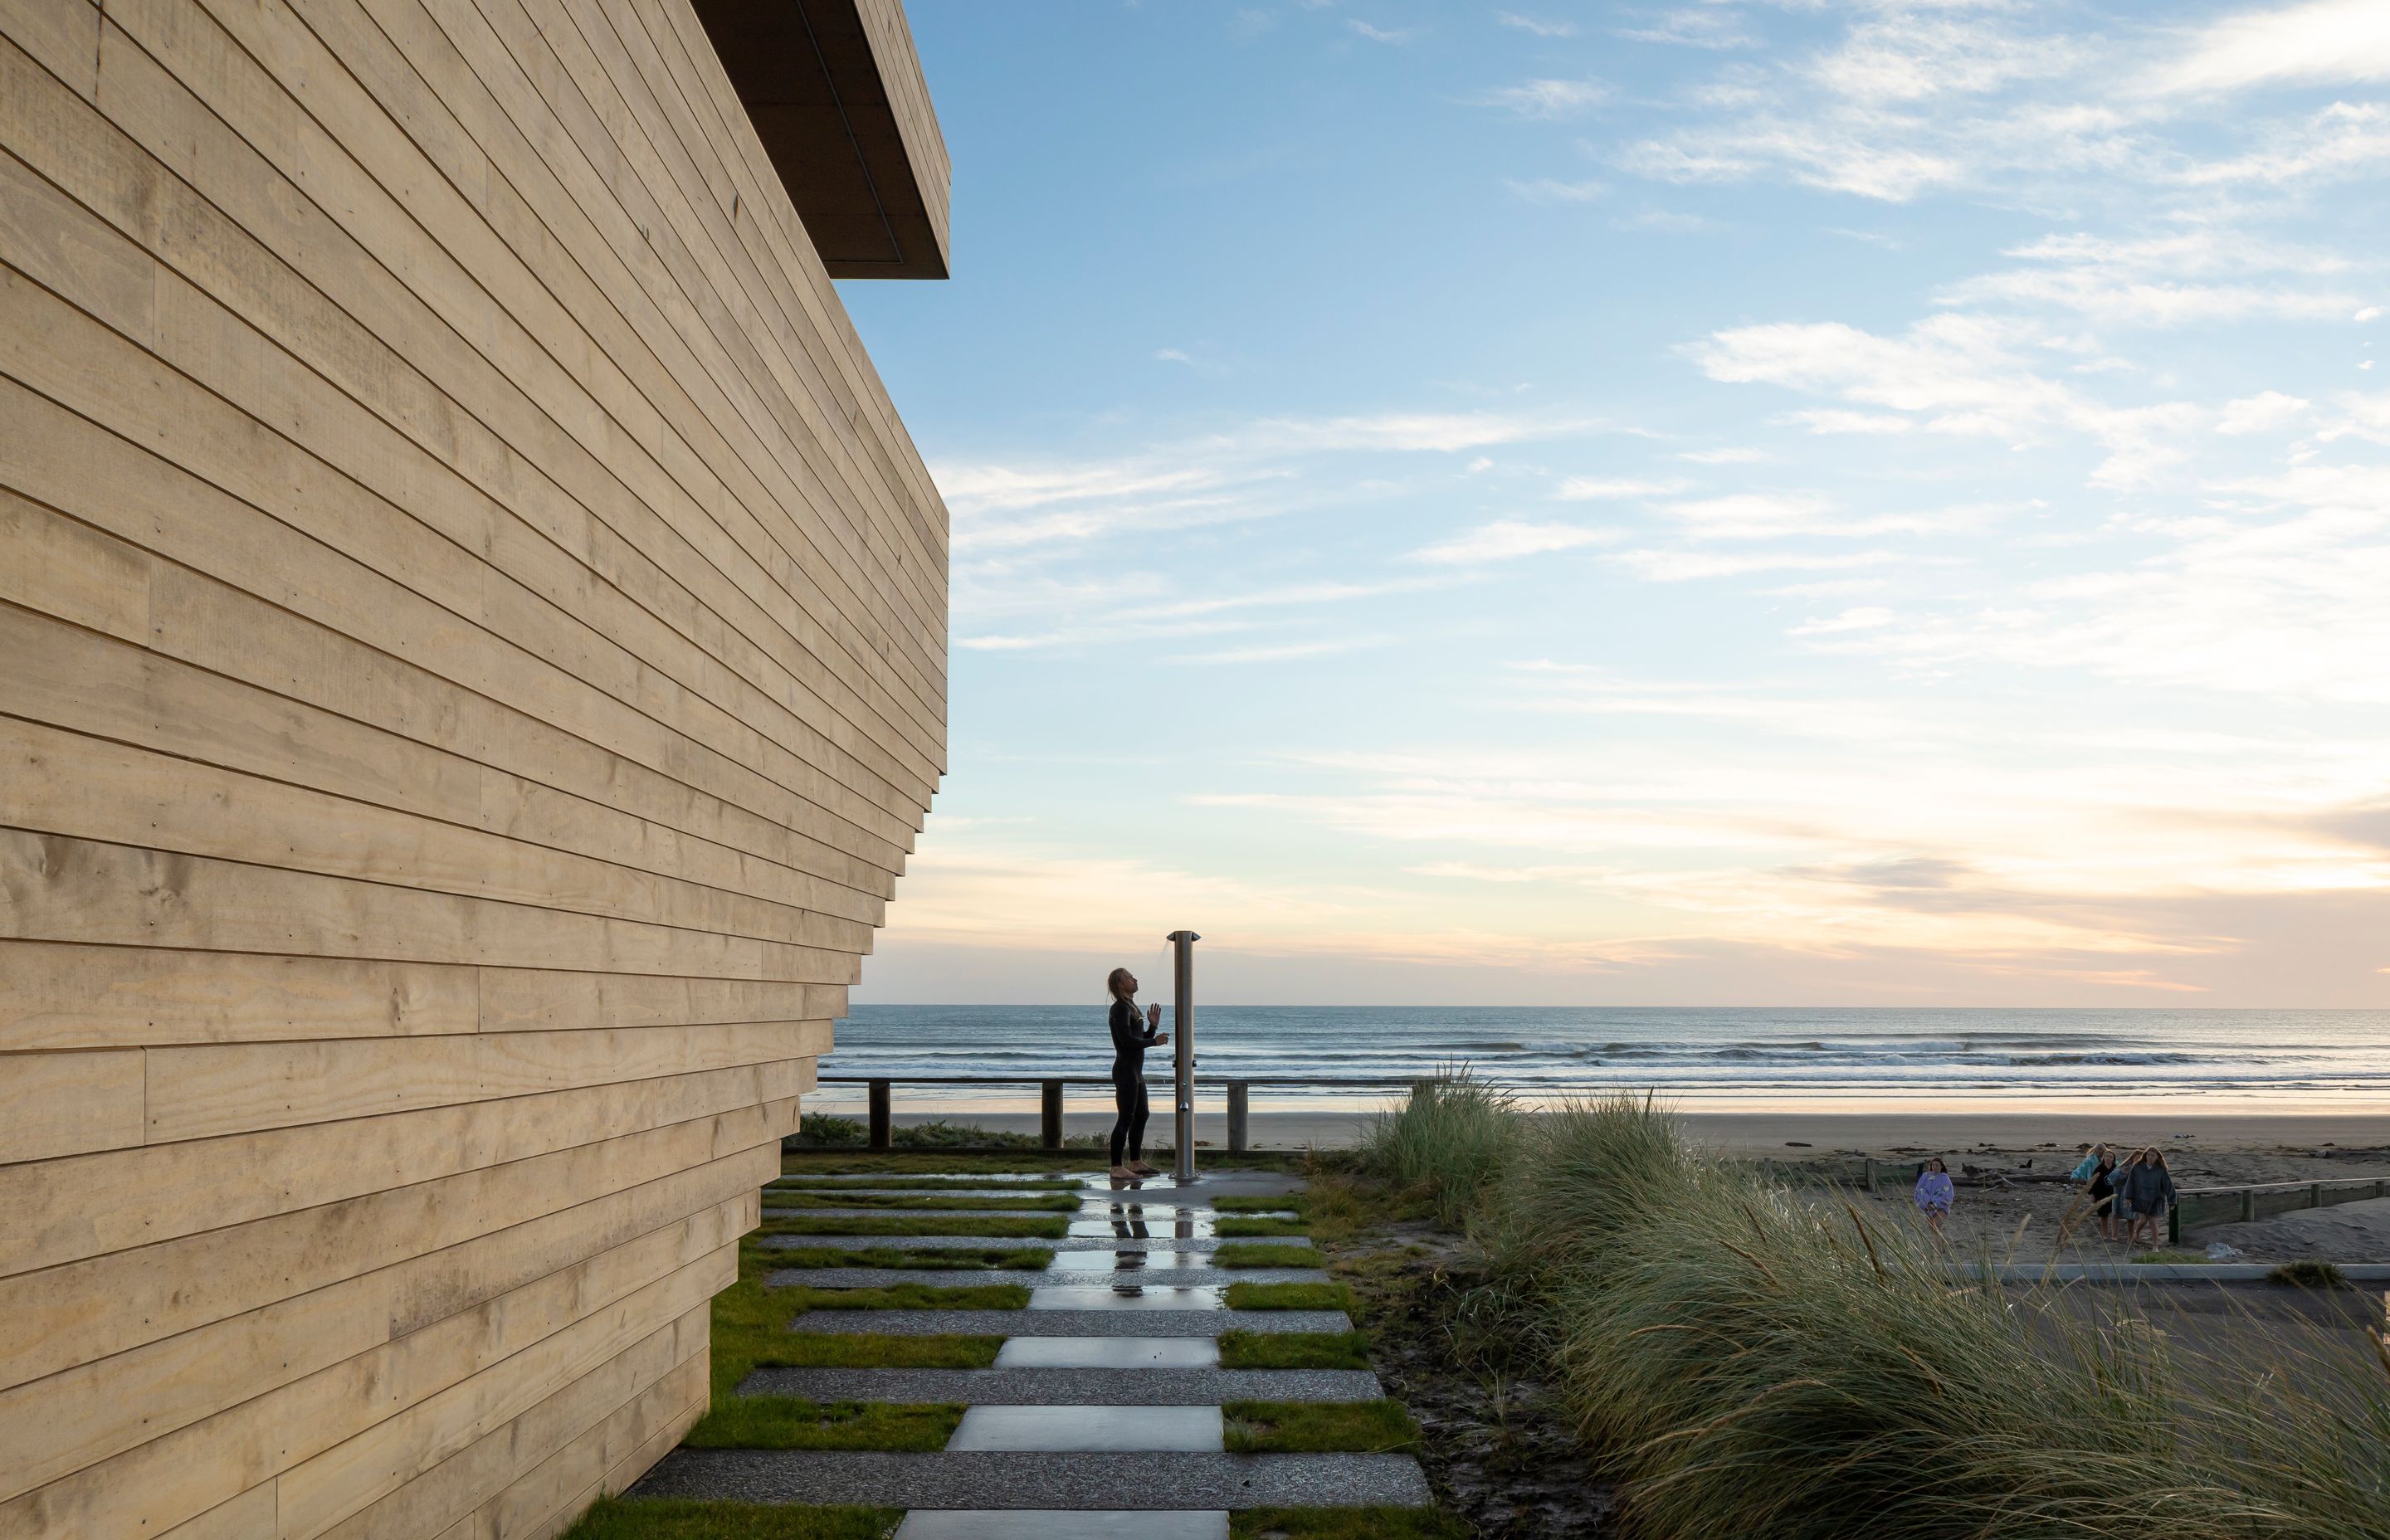 The proximity to the beach meant it was crucial for the materiality of the building to be durable.